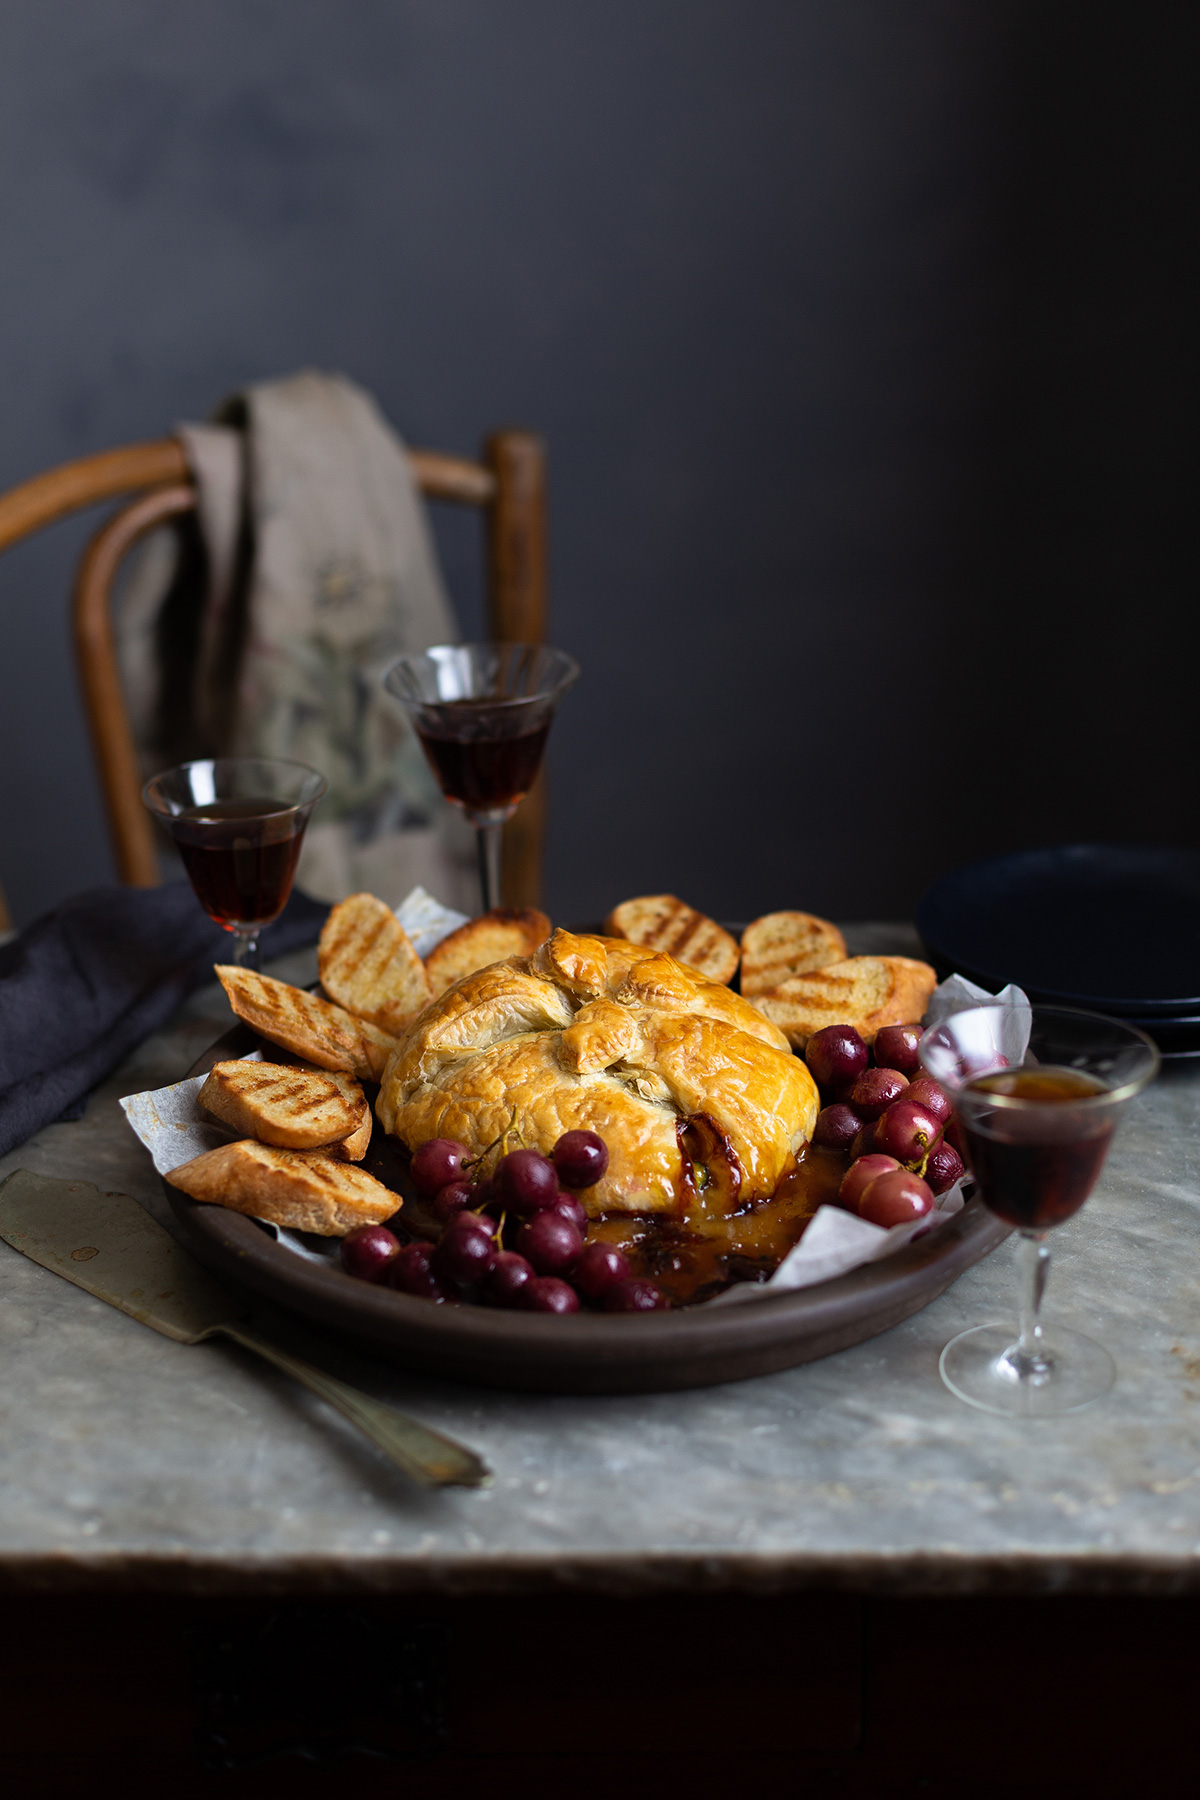 Camembert baked in puff pastry with raisins & pistachios recipe